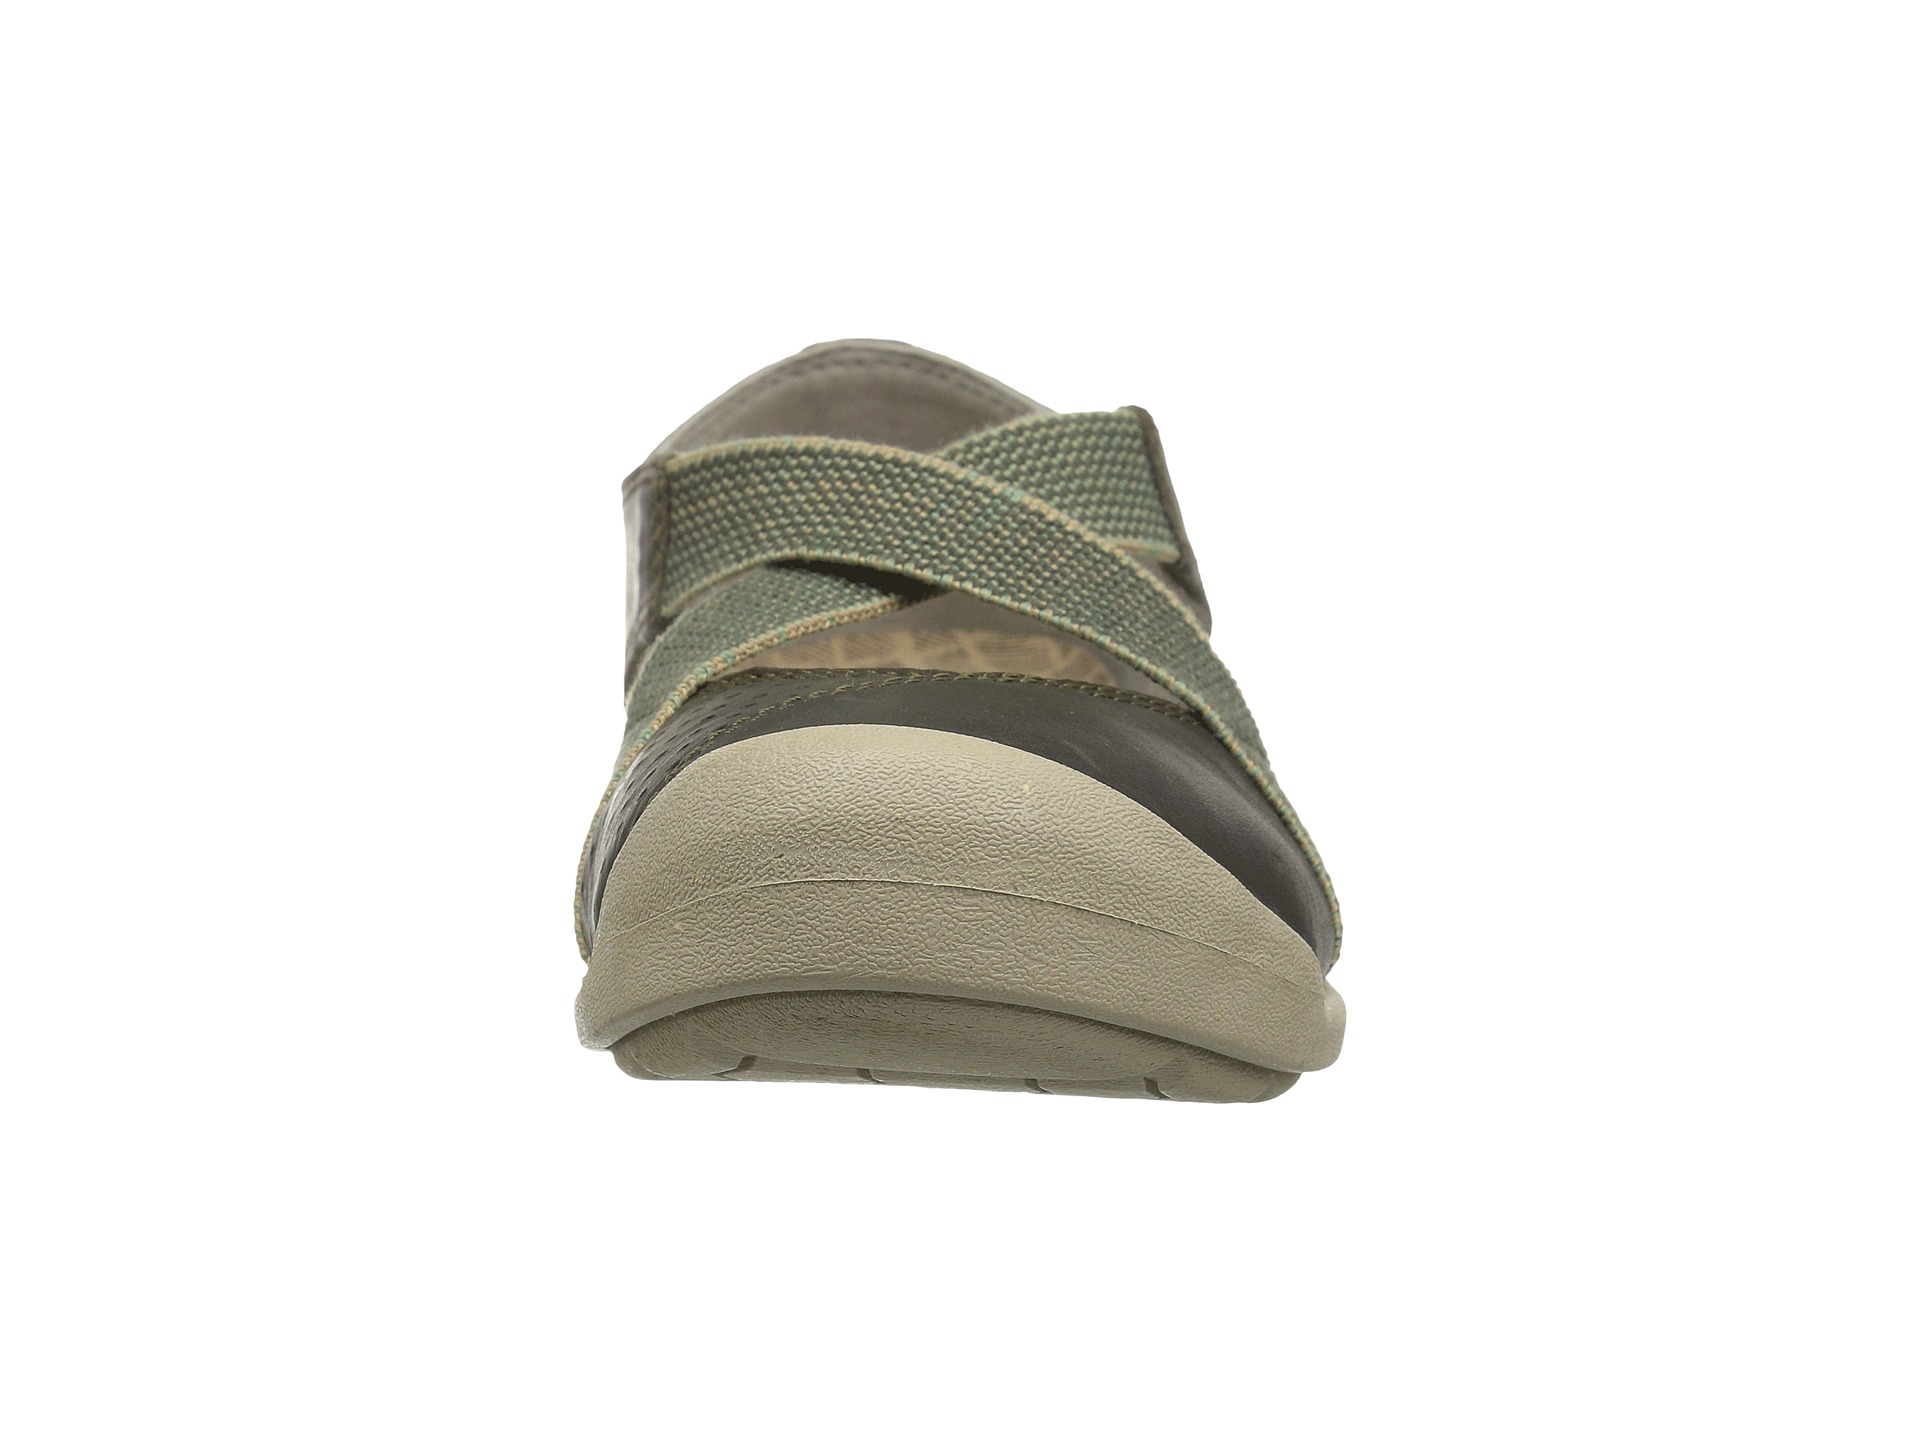 Keen Lower East Side MJ Olive/Dried Sage - Zappos.com Free Shipping ...